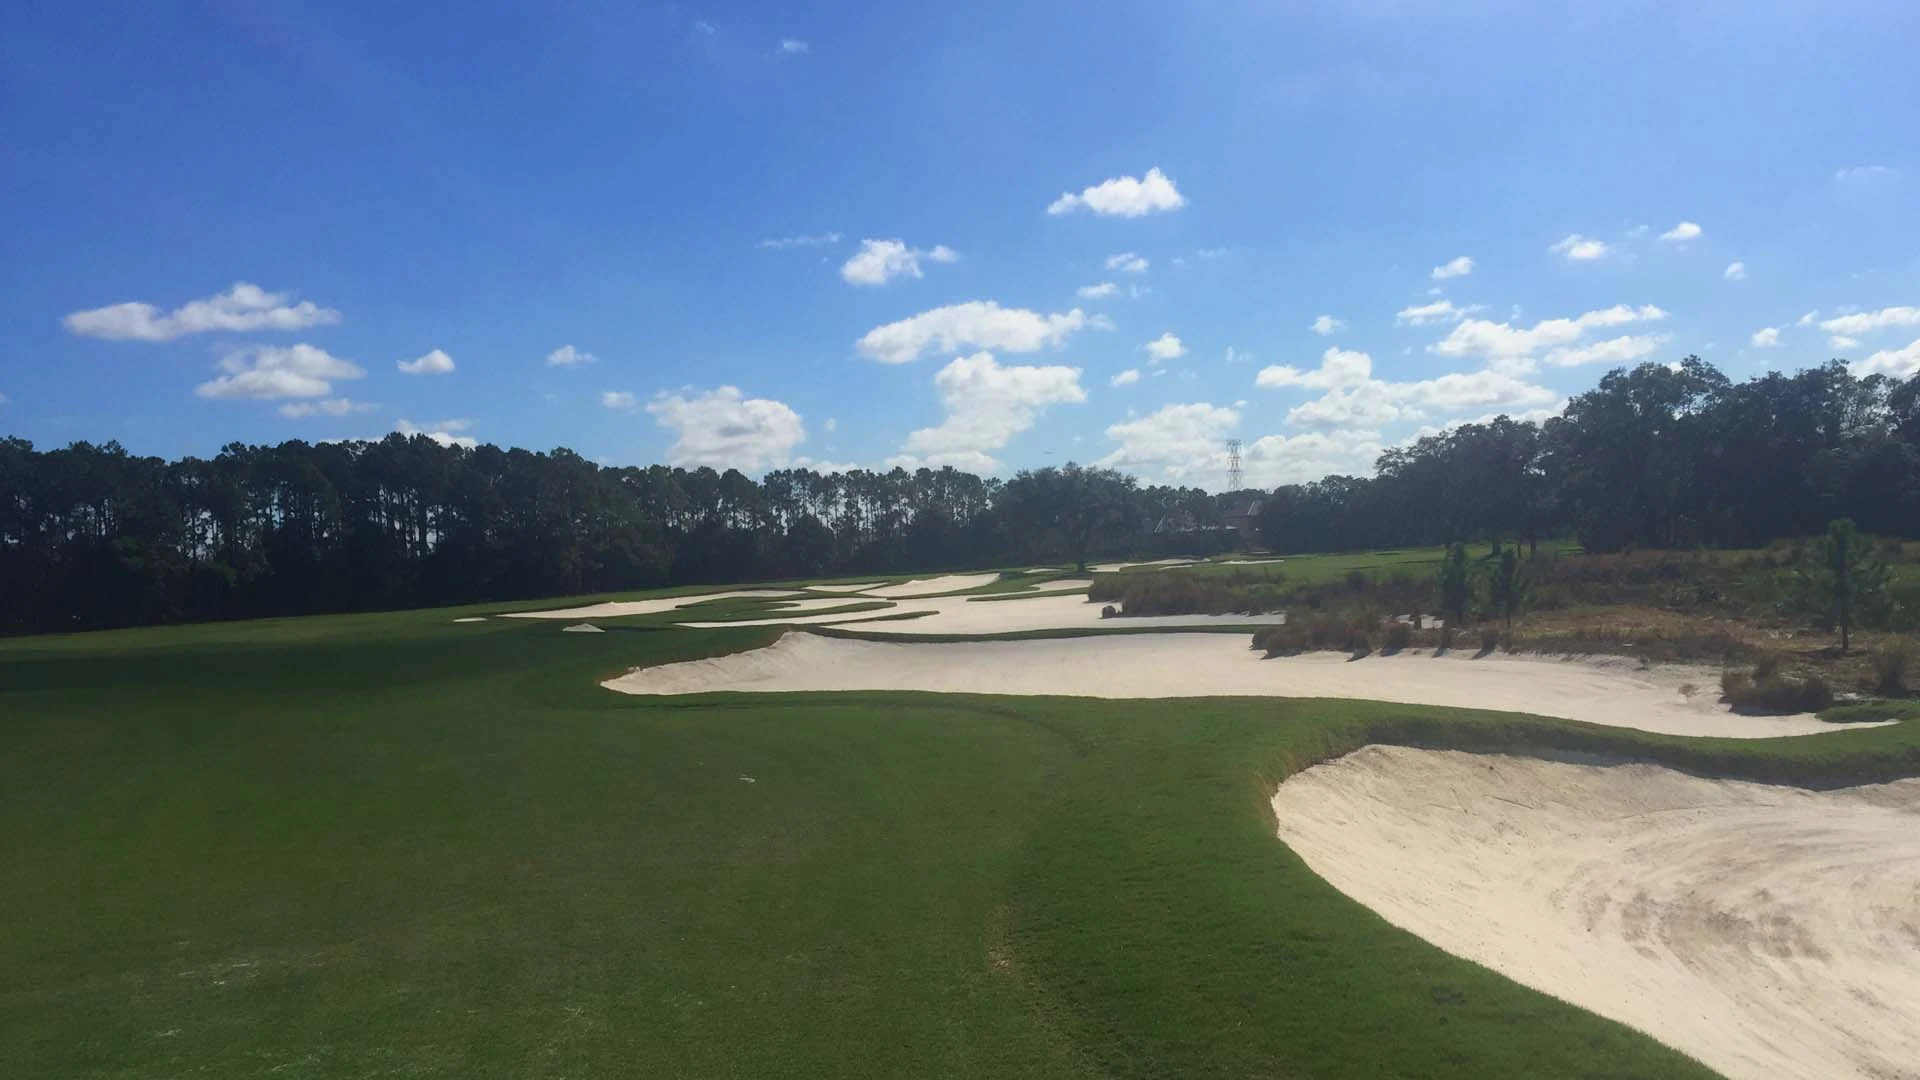 Photo of a sand bunker installed by Westscapes Golf Construction on Florida golf course.